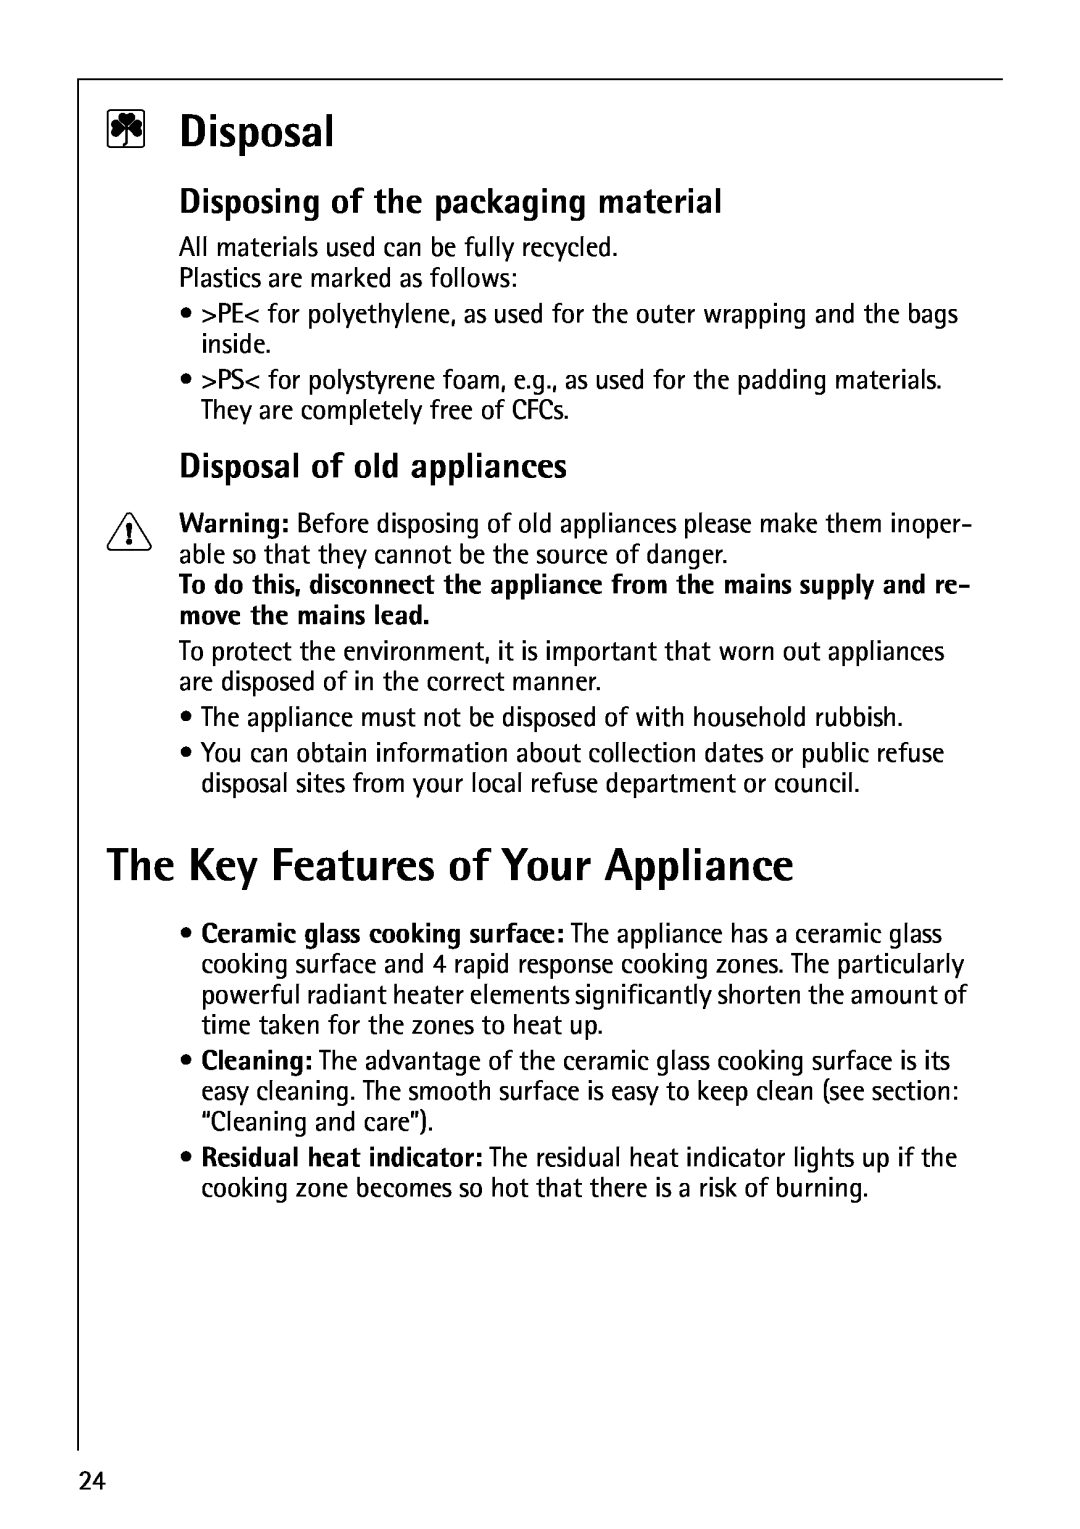 AEG 61000M 2Disposal, The Key Features of Your Appliance, Disposing of the packaging material, Disposal of old appliances 